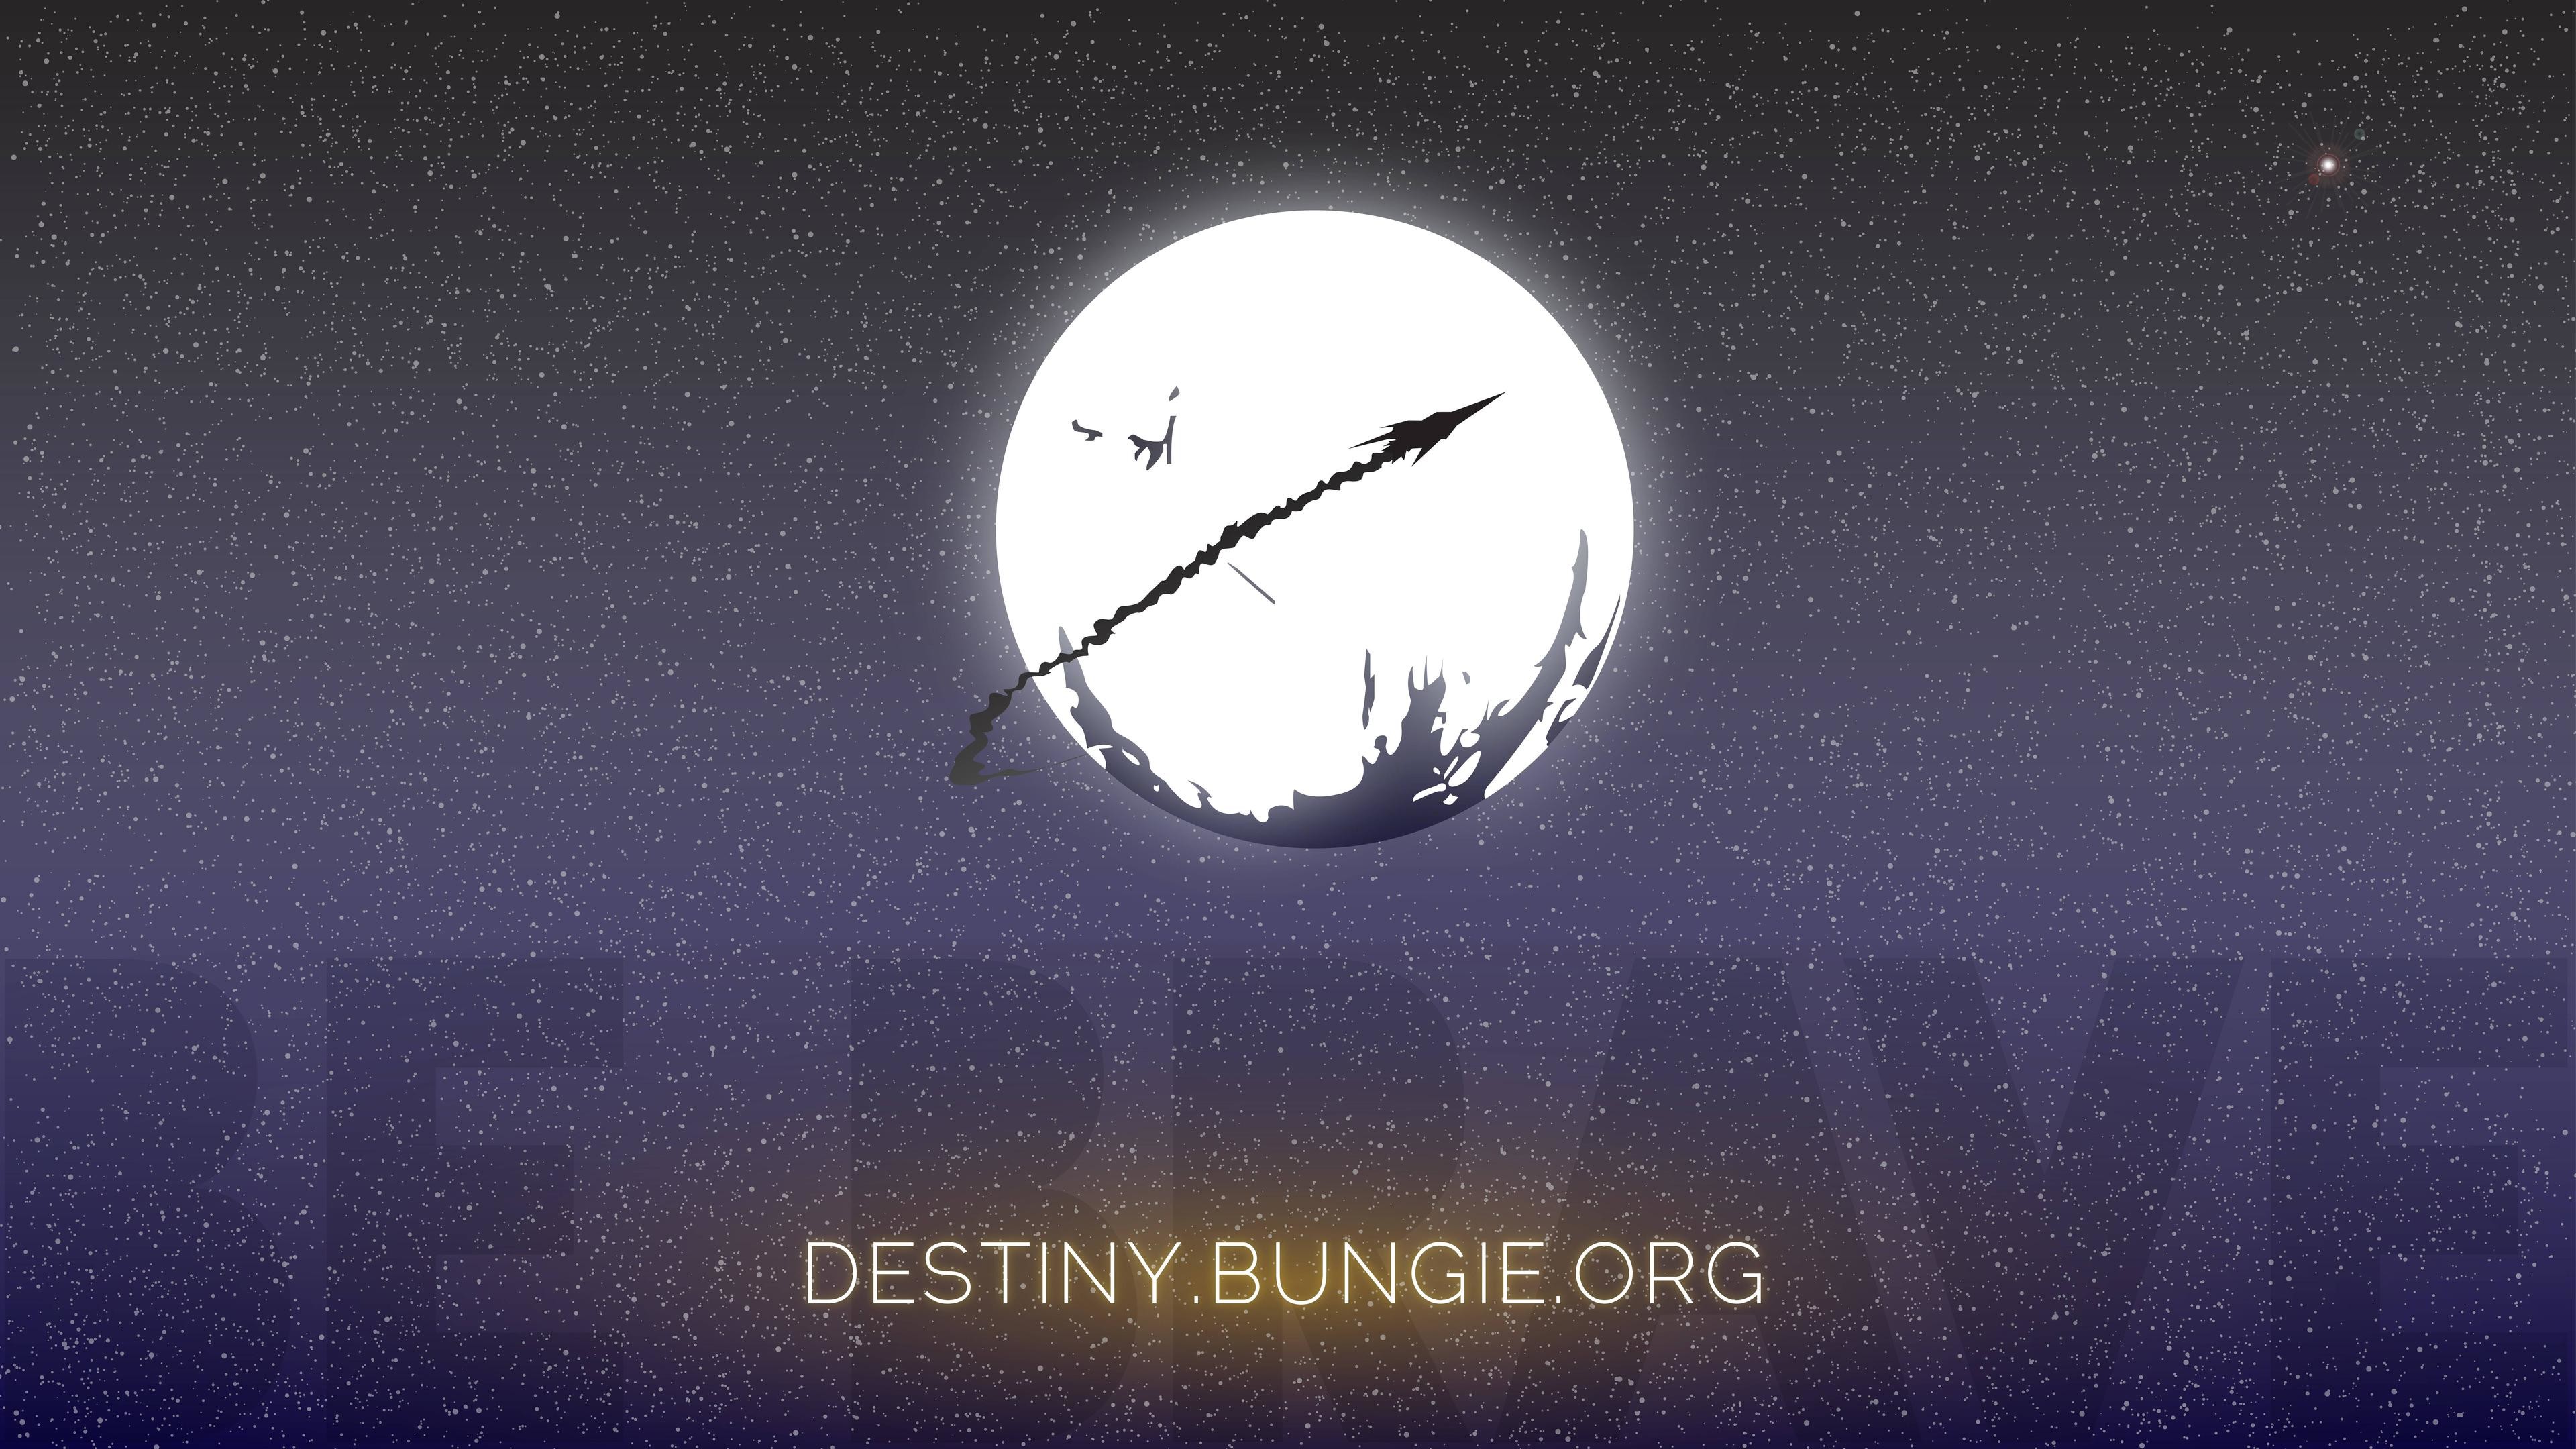 3840x2160 ... 24 Destiny Backgrounds, Wallpapers, Images, Pictures | Design .